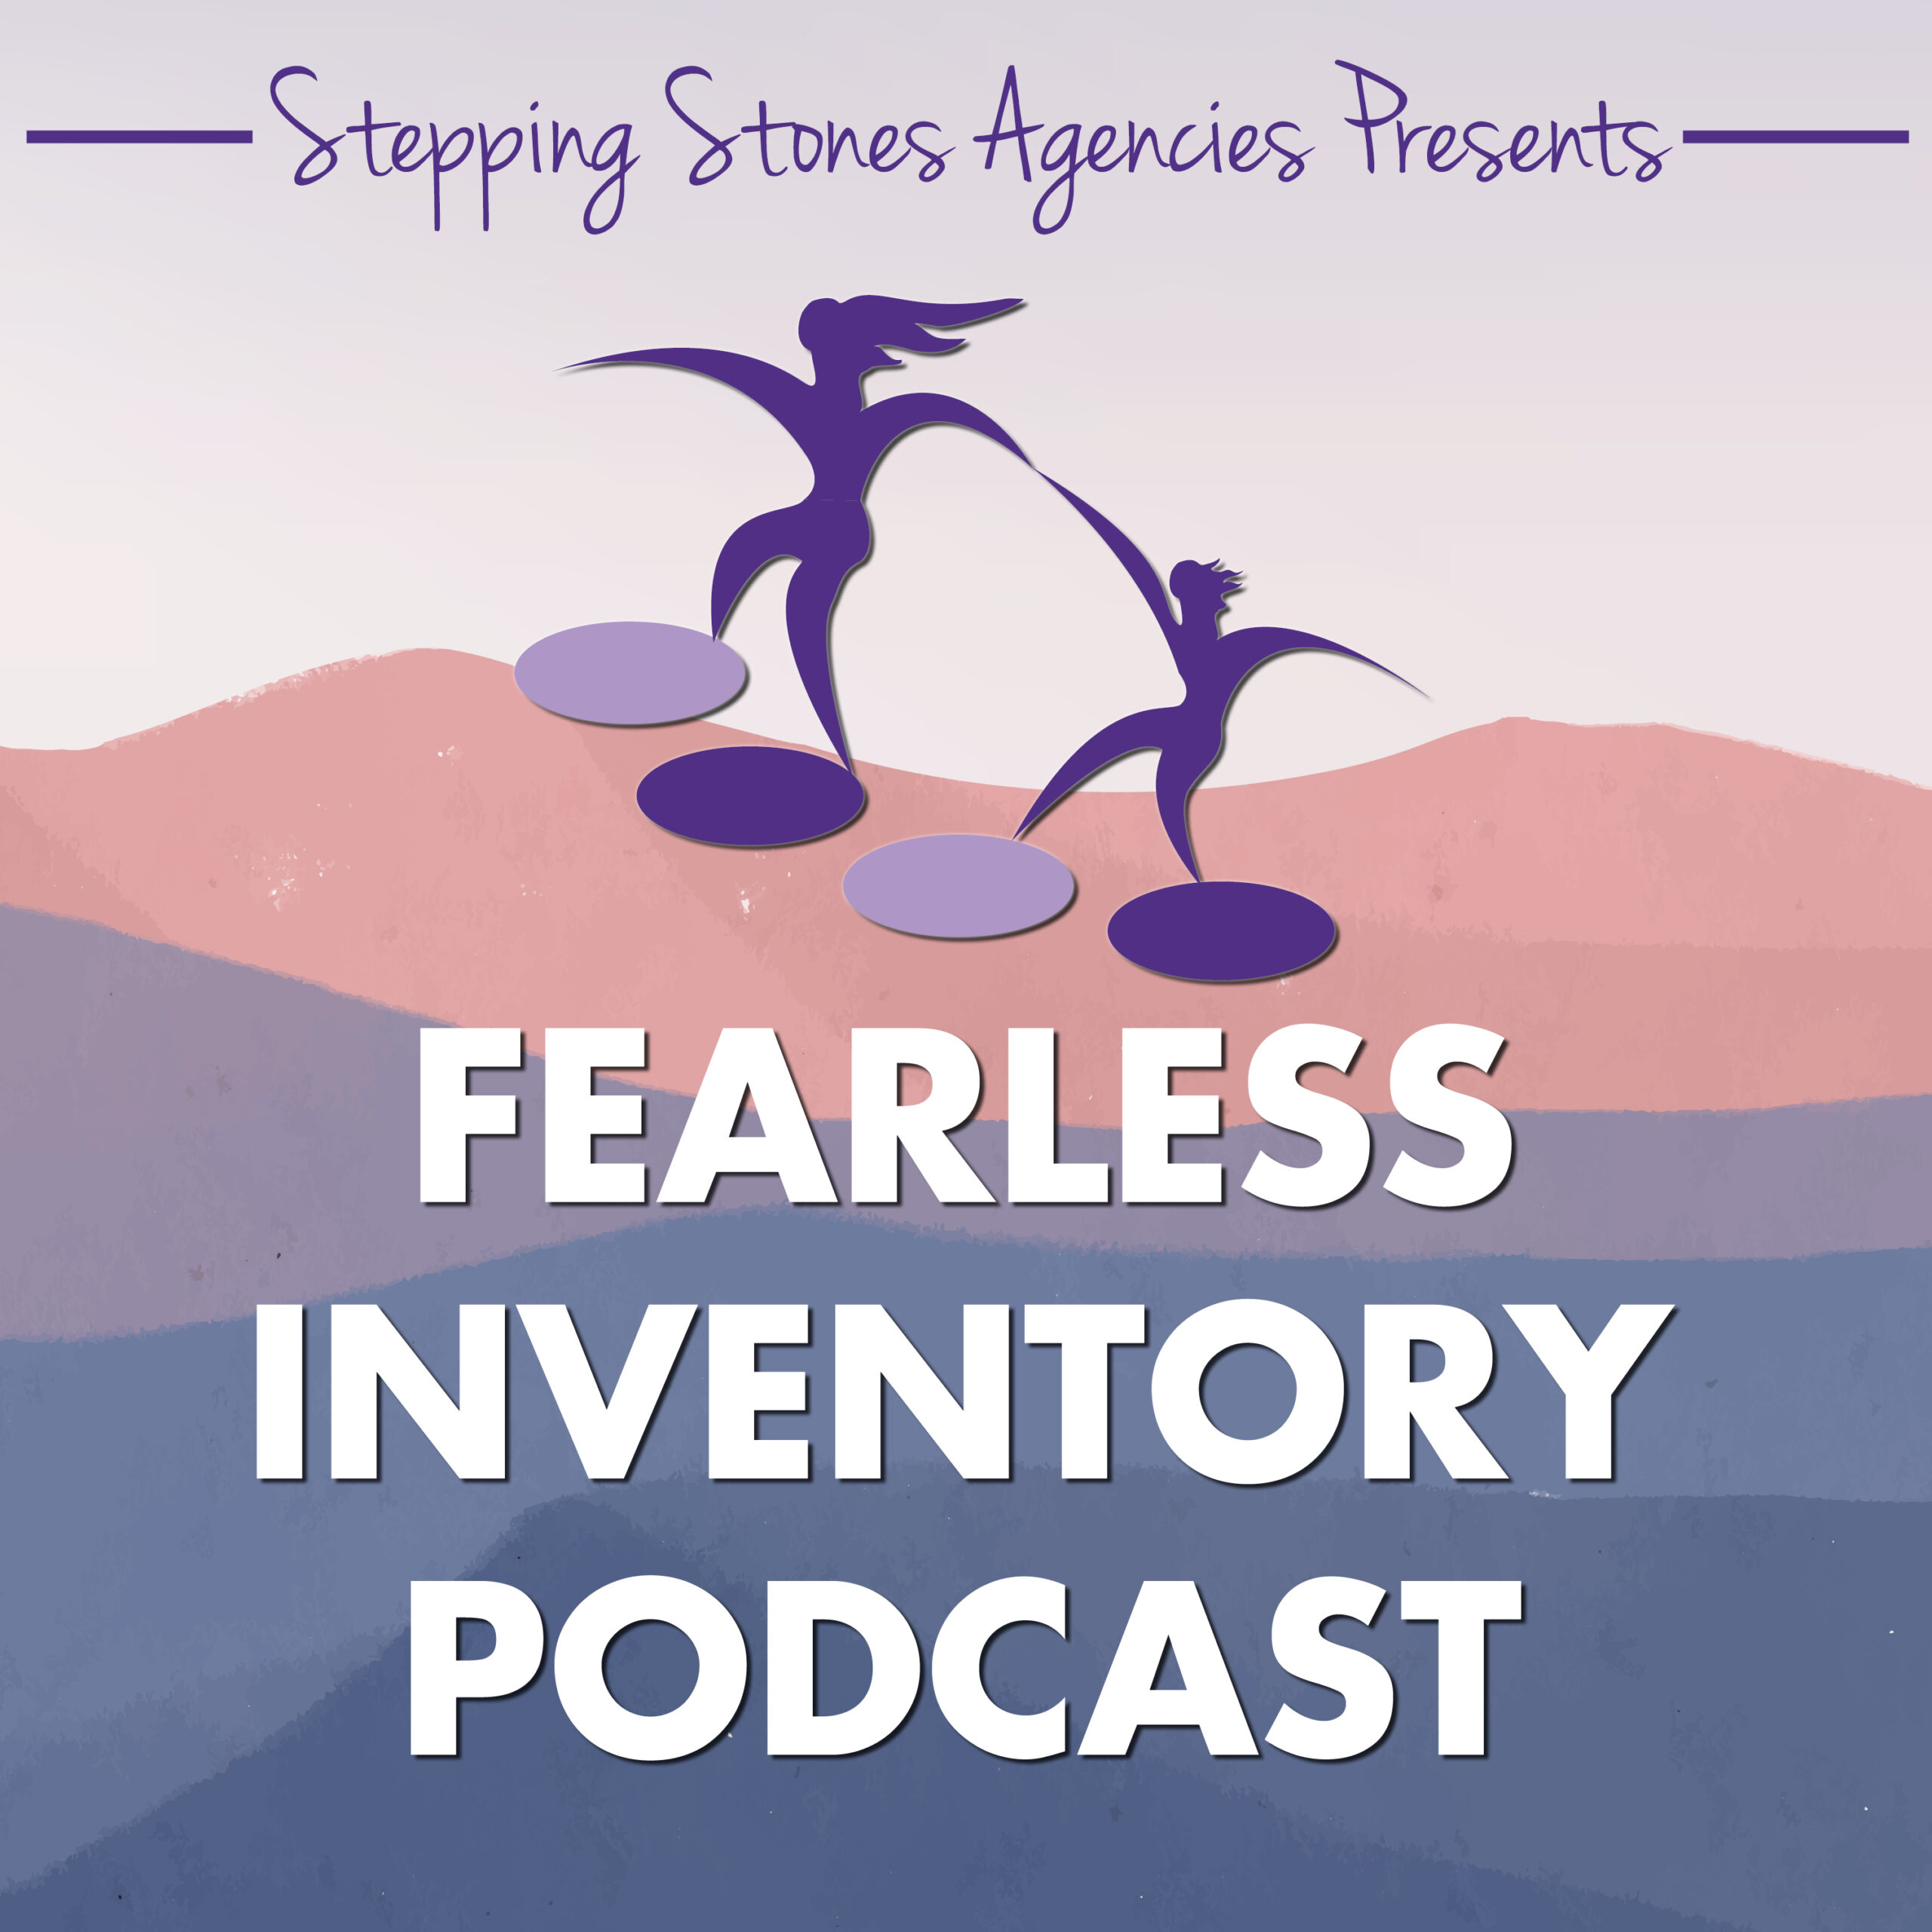 Episode 1: Introduction to Fearless Inventory